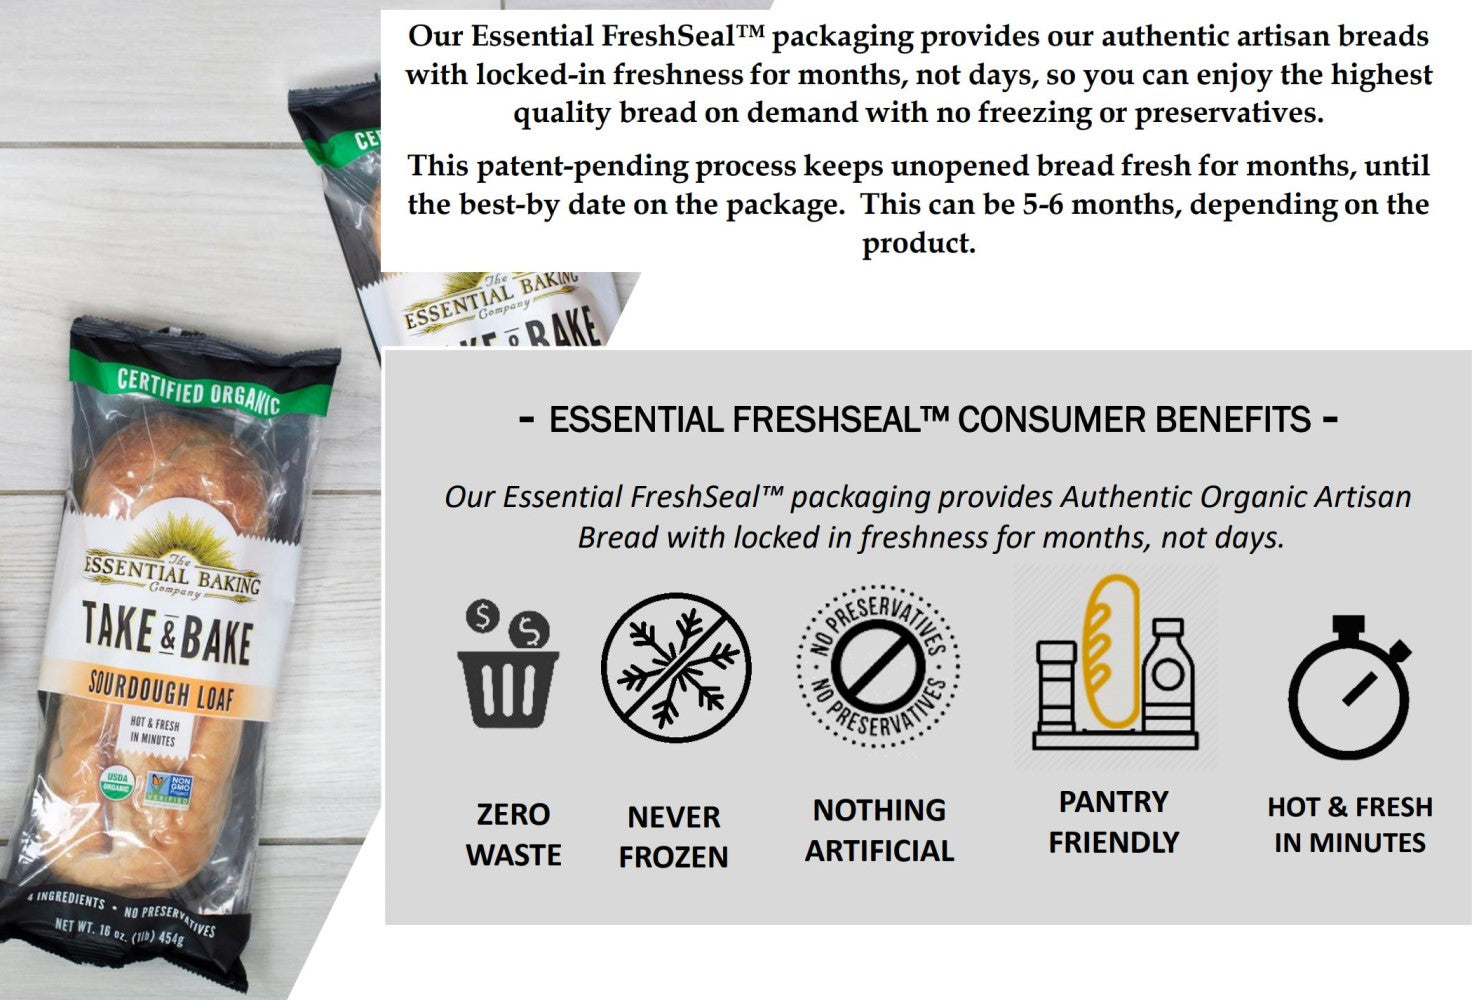 Zero Waste Never Frozen Nothing Artificial Pantry Friendly Hot And Fresh In Minutes Essential Baking Company FreshSeal Packaging